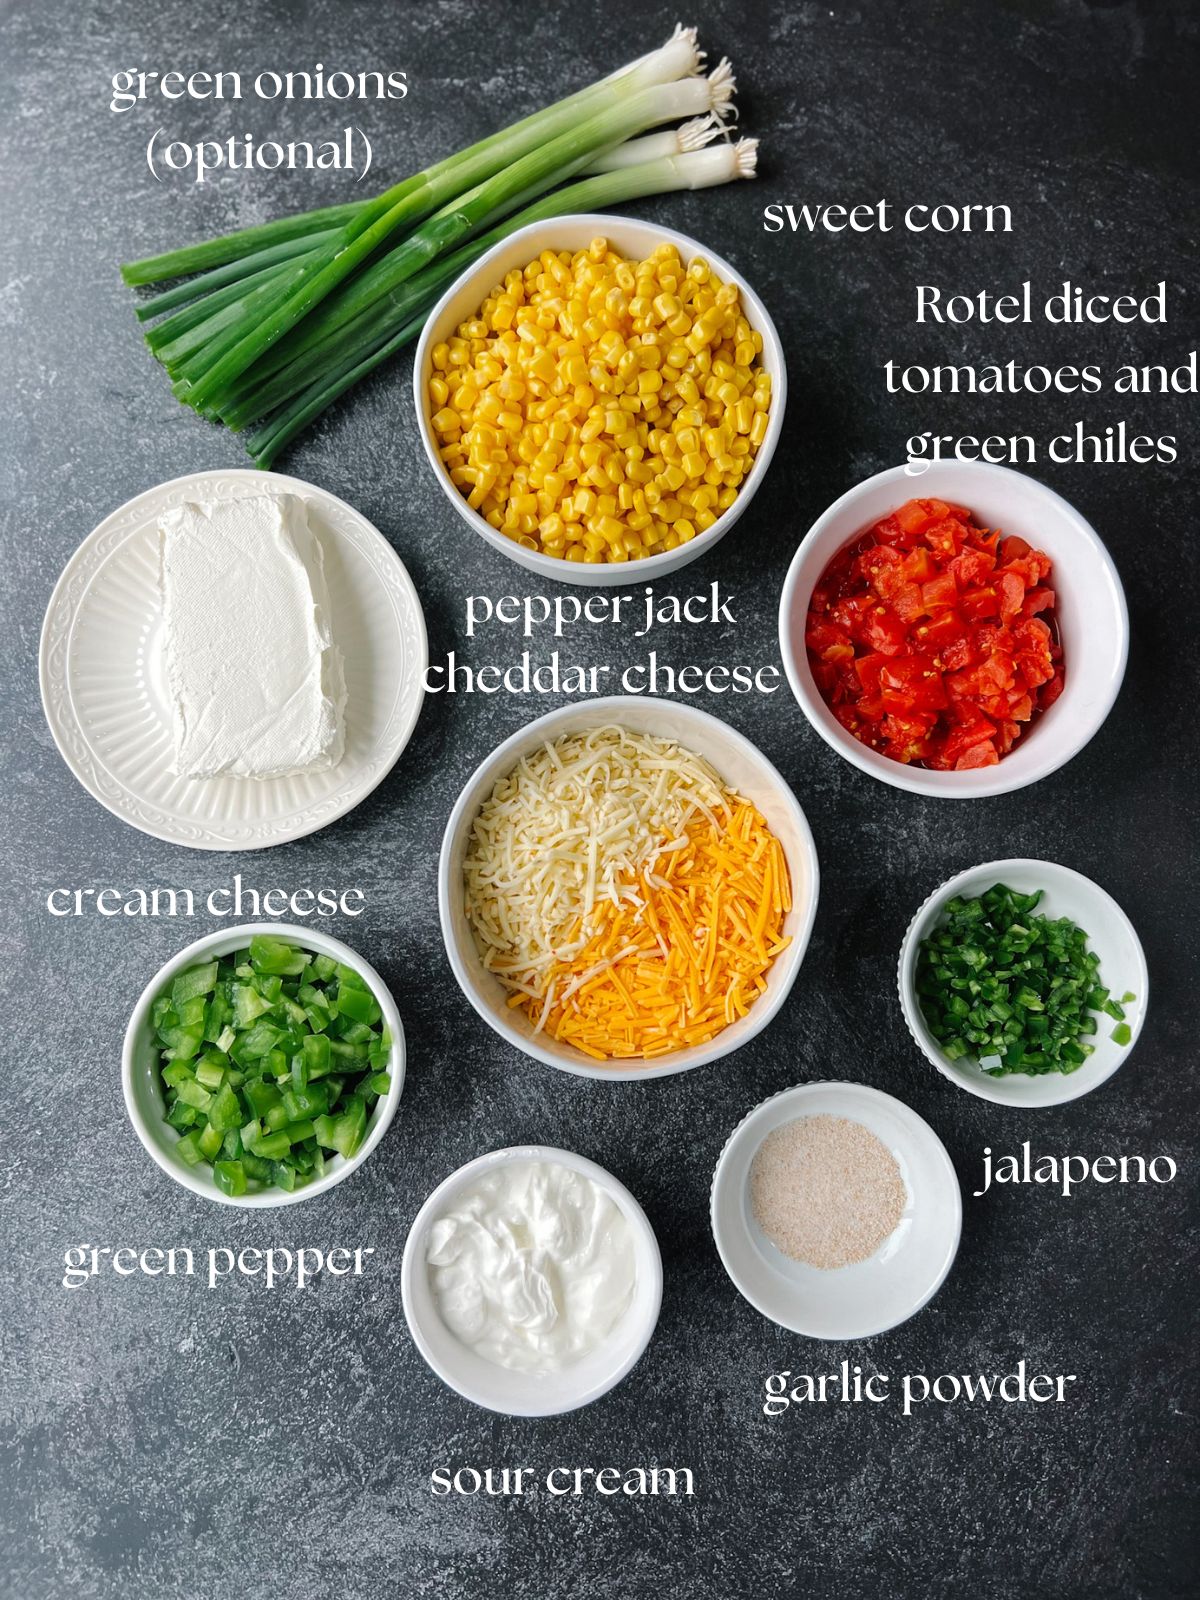 Ingredients for the cream cheese corn dip: green onions, sweet corn, Rotel diced tomatoes and green chiles, pepper jack and cheddar cheese, cream cheese, garlic powder, jalapeno, green pepper, sour cream.